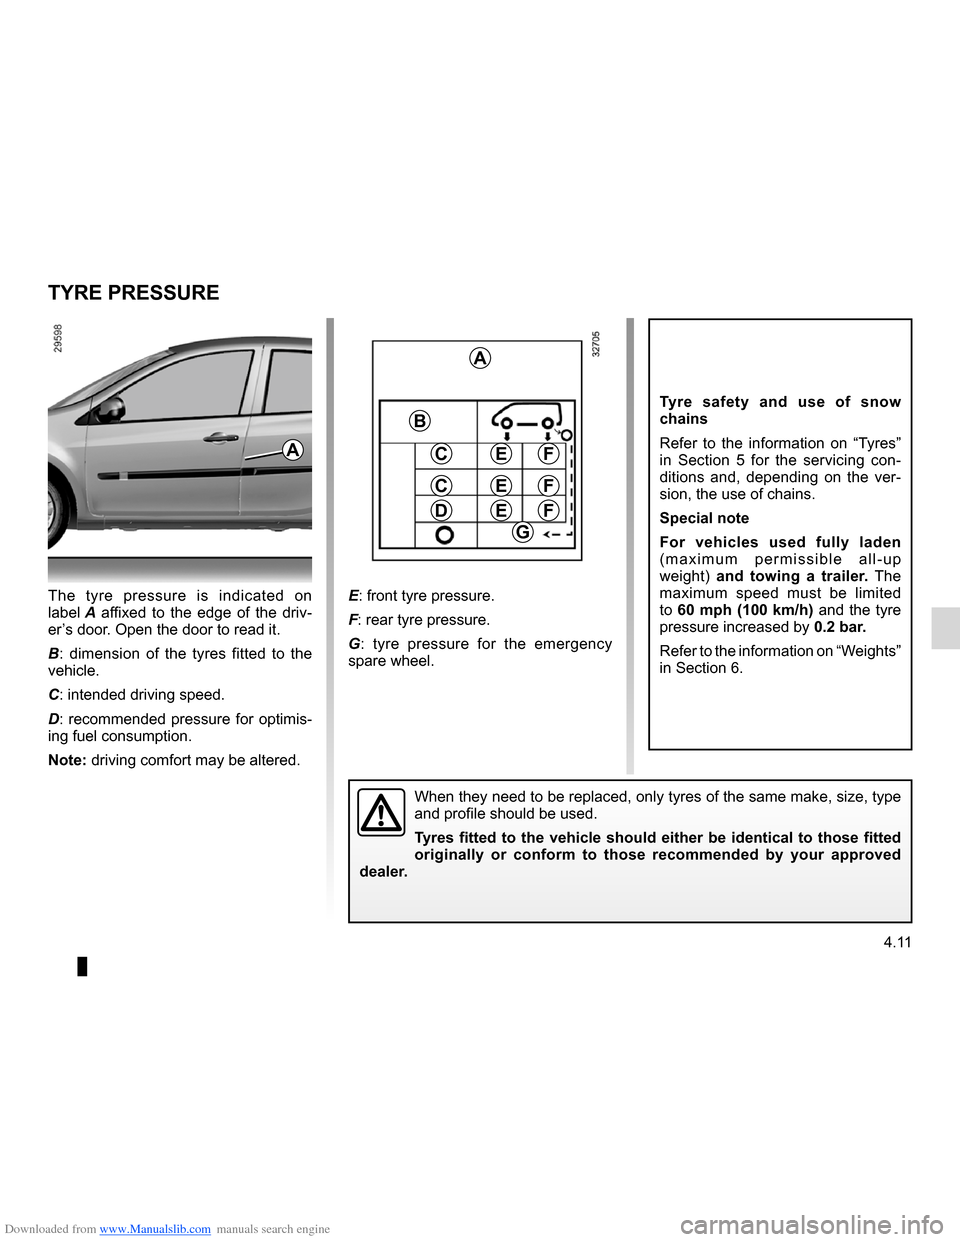 RENAULT CLIO 2012 X85 / 3.G Owners Manual Downloaded from www.Manualslib.com manuals search engine 4.11
ENG_UD20297_3
Pression de gonflage des pneumatiques (X85 - B85 - C85 - S85 - K85 - Re\
nault)
ENG_NU_853-7_BCSK85_Renault_4
Tyre pressures